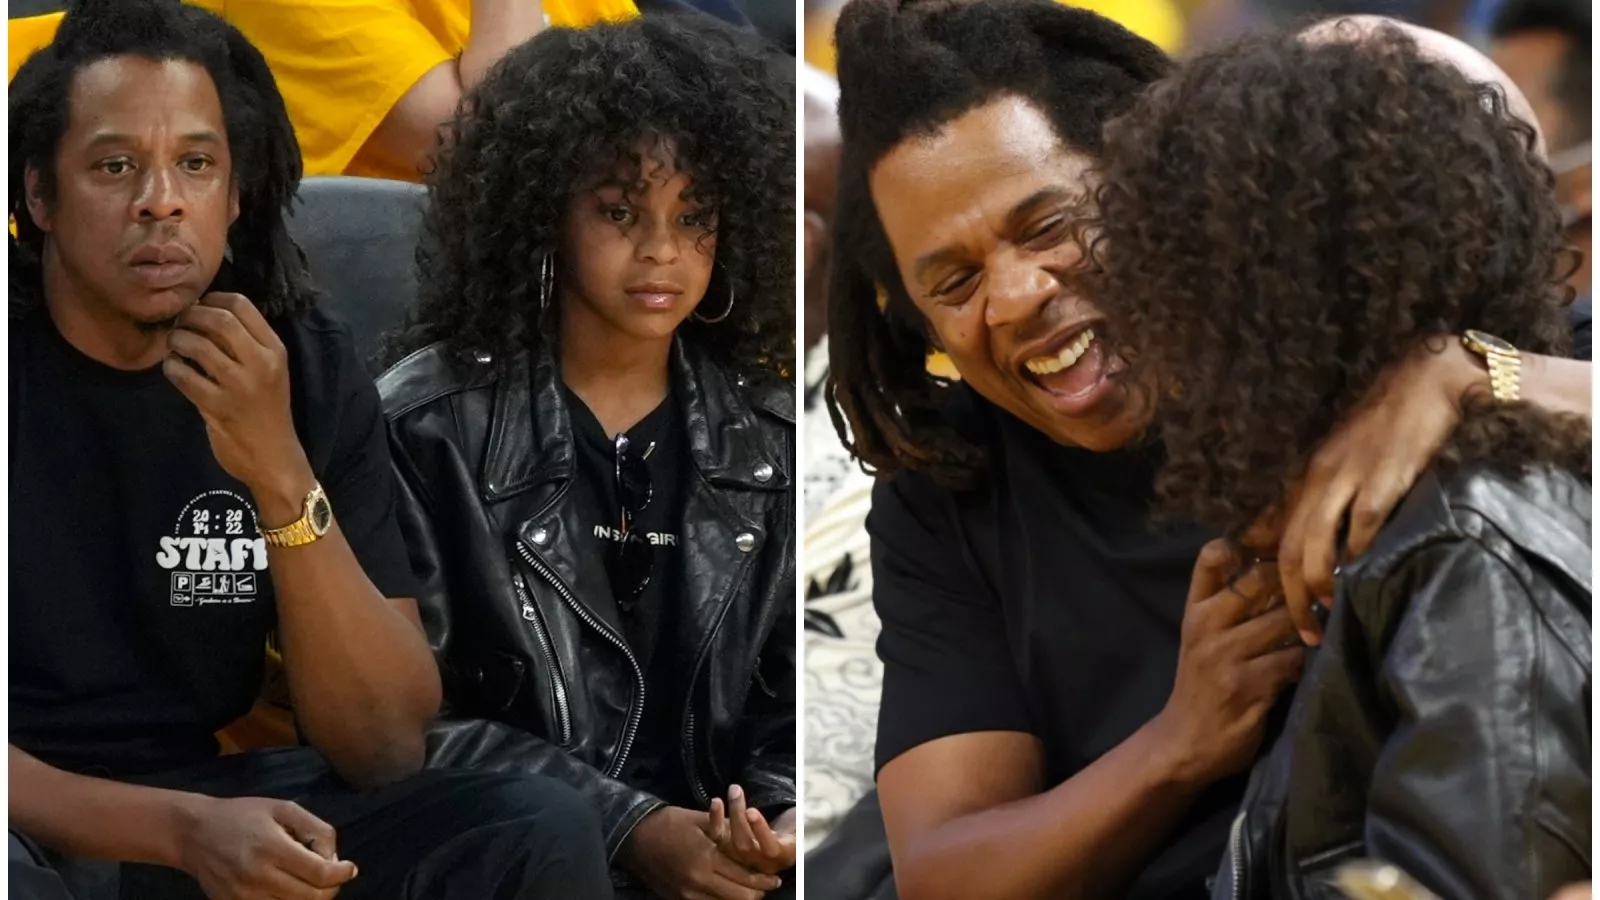 Beyonce fans think her daughter Blue Ivy, 10, looks SO grown up & just like  her mom at NBA game with dad Jay Z